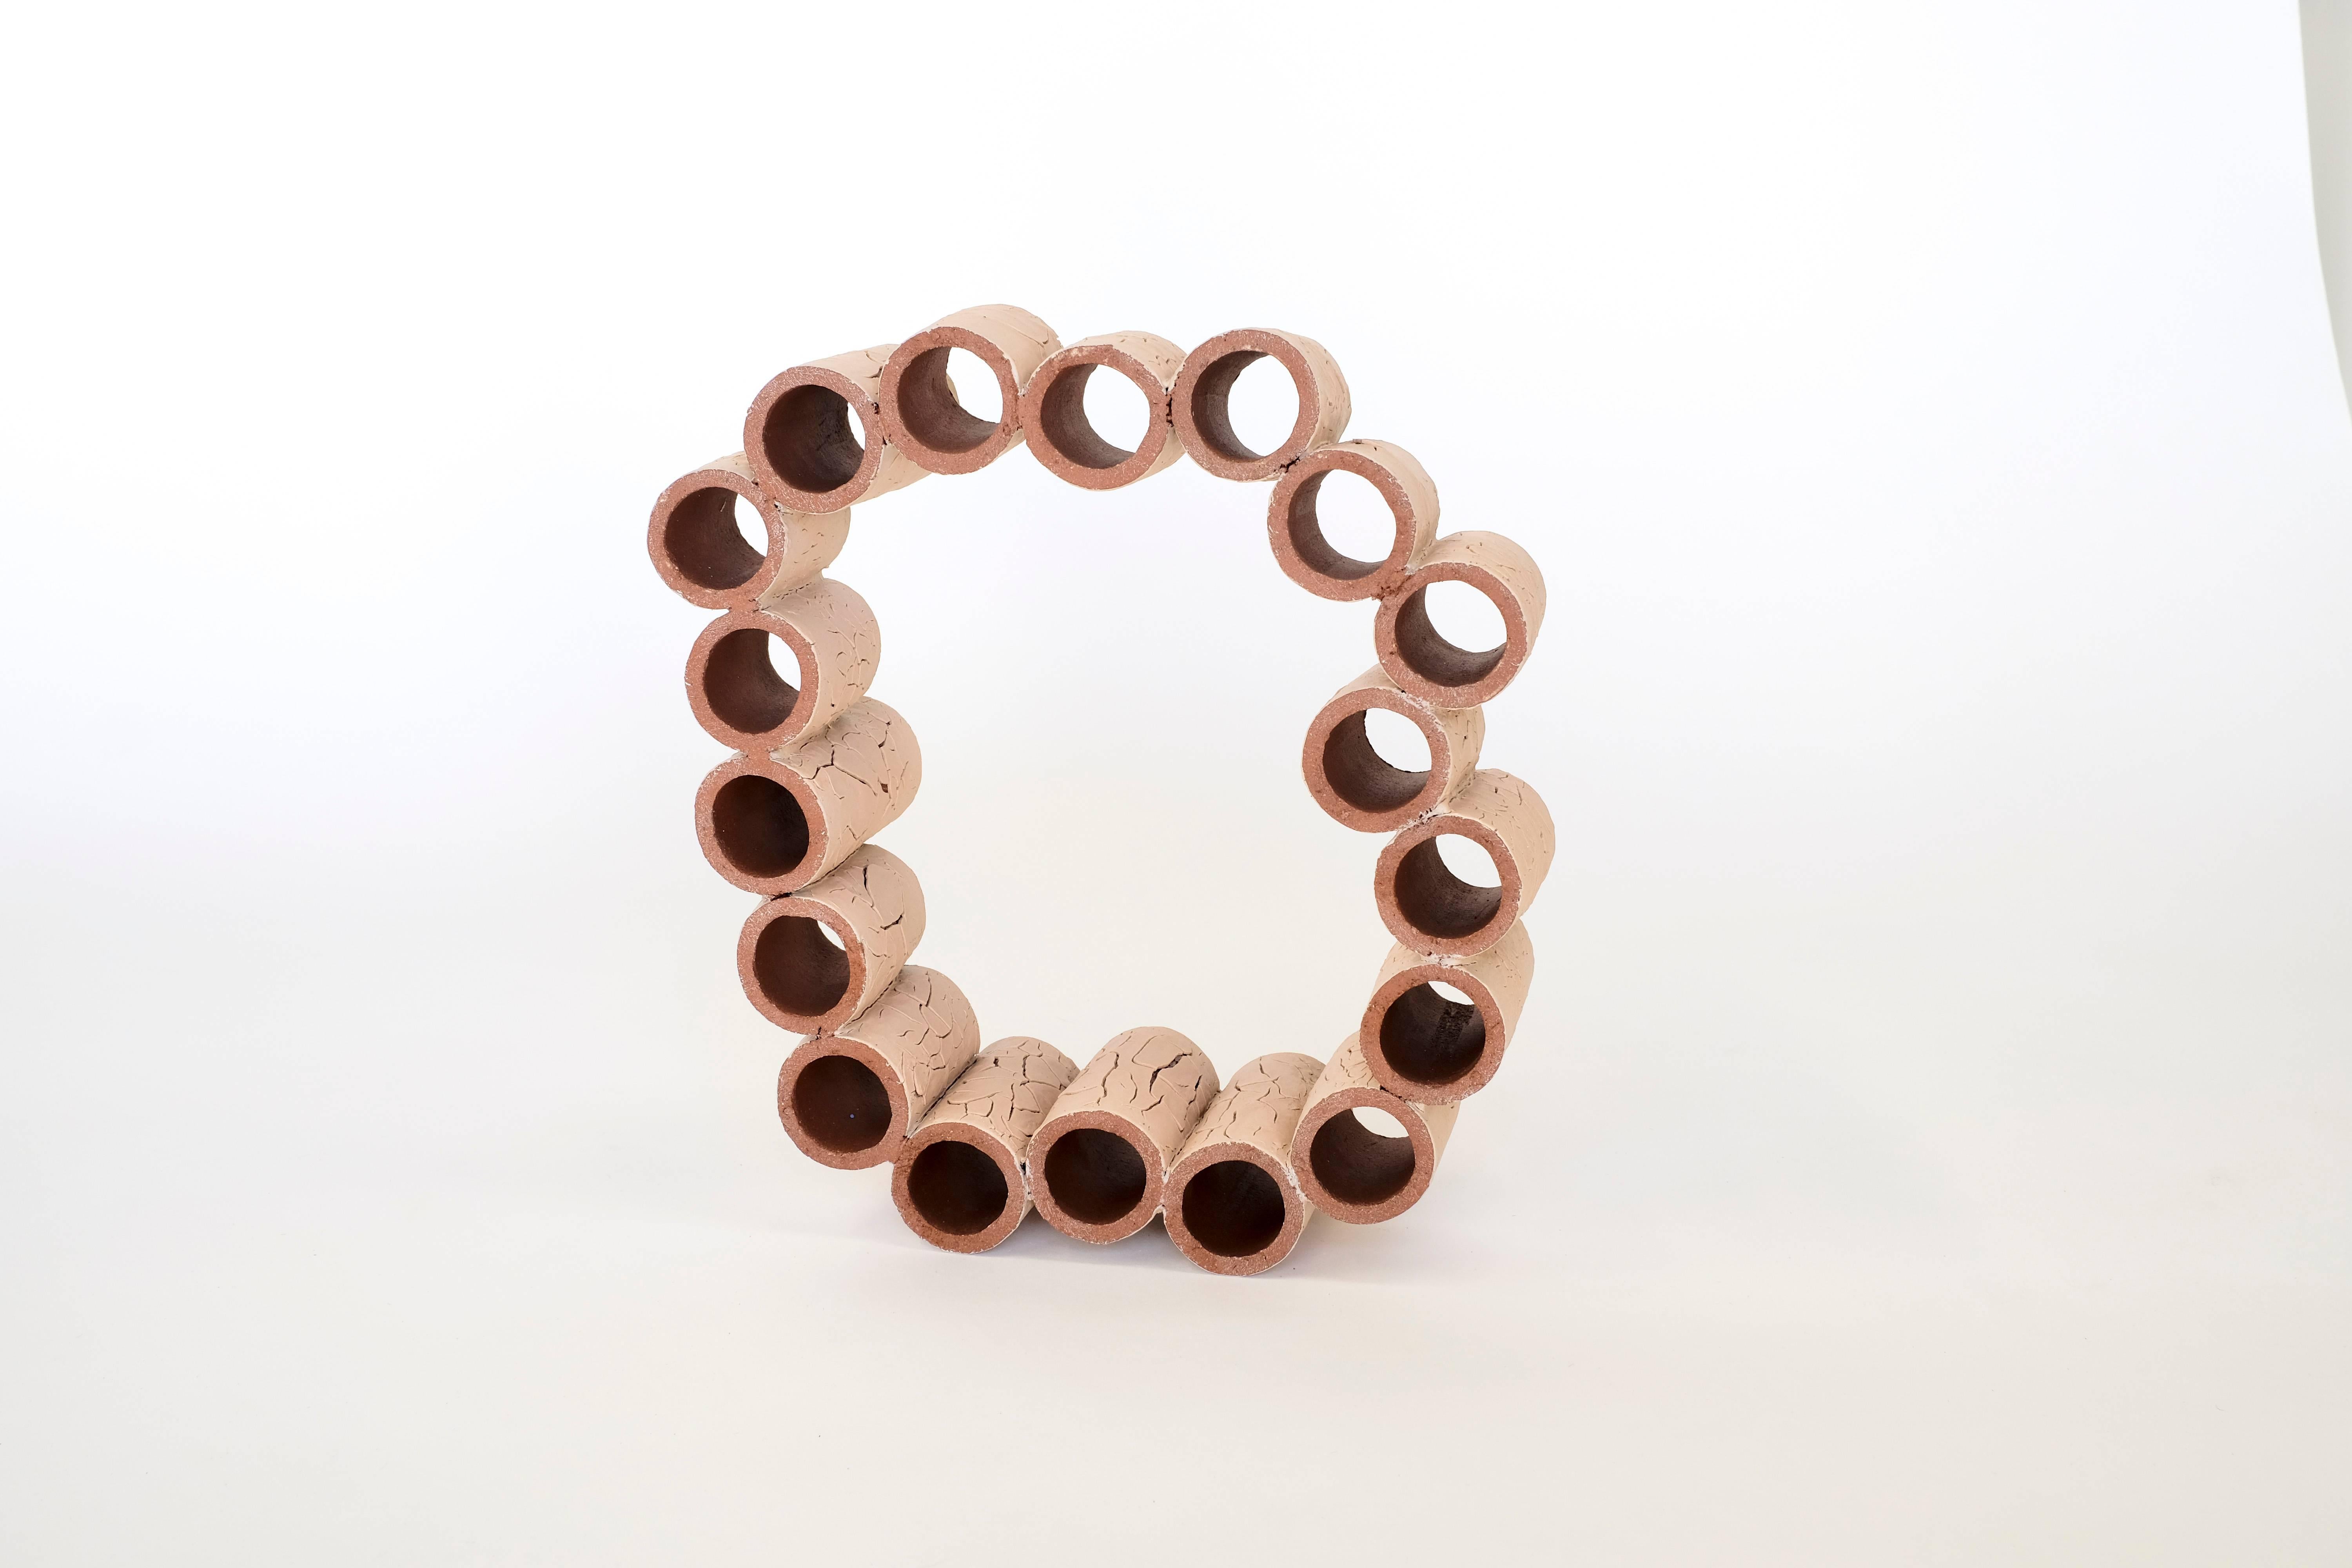 American Terra Cotta Circle Sculpture with Crackle Texture by Ben Medansky For Sale